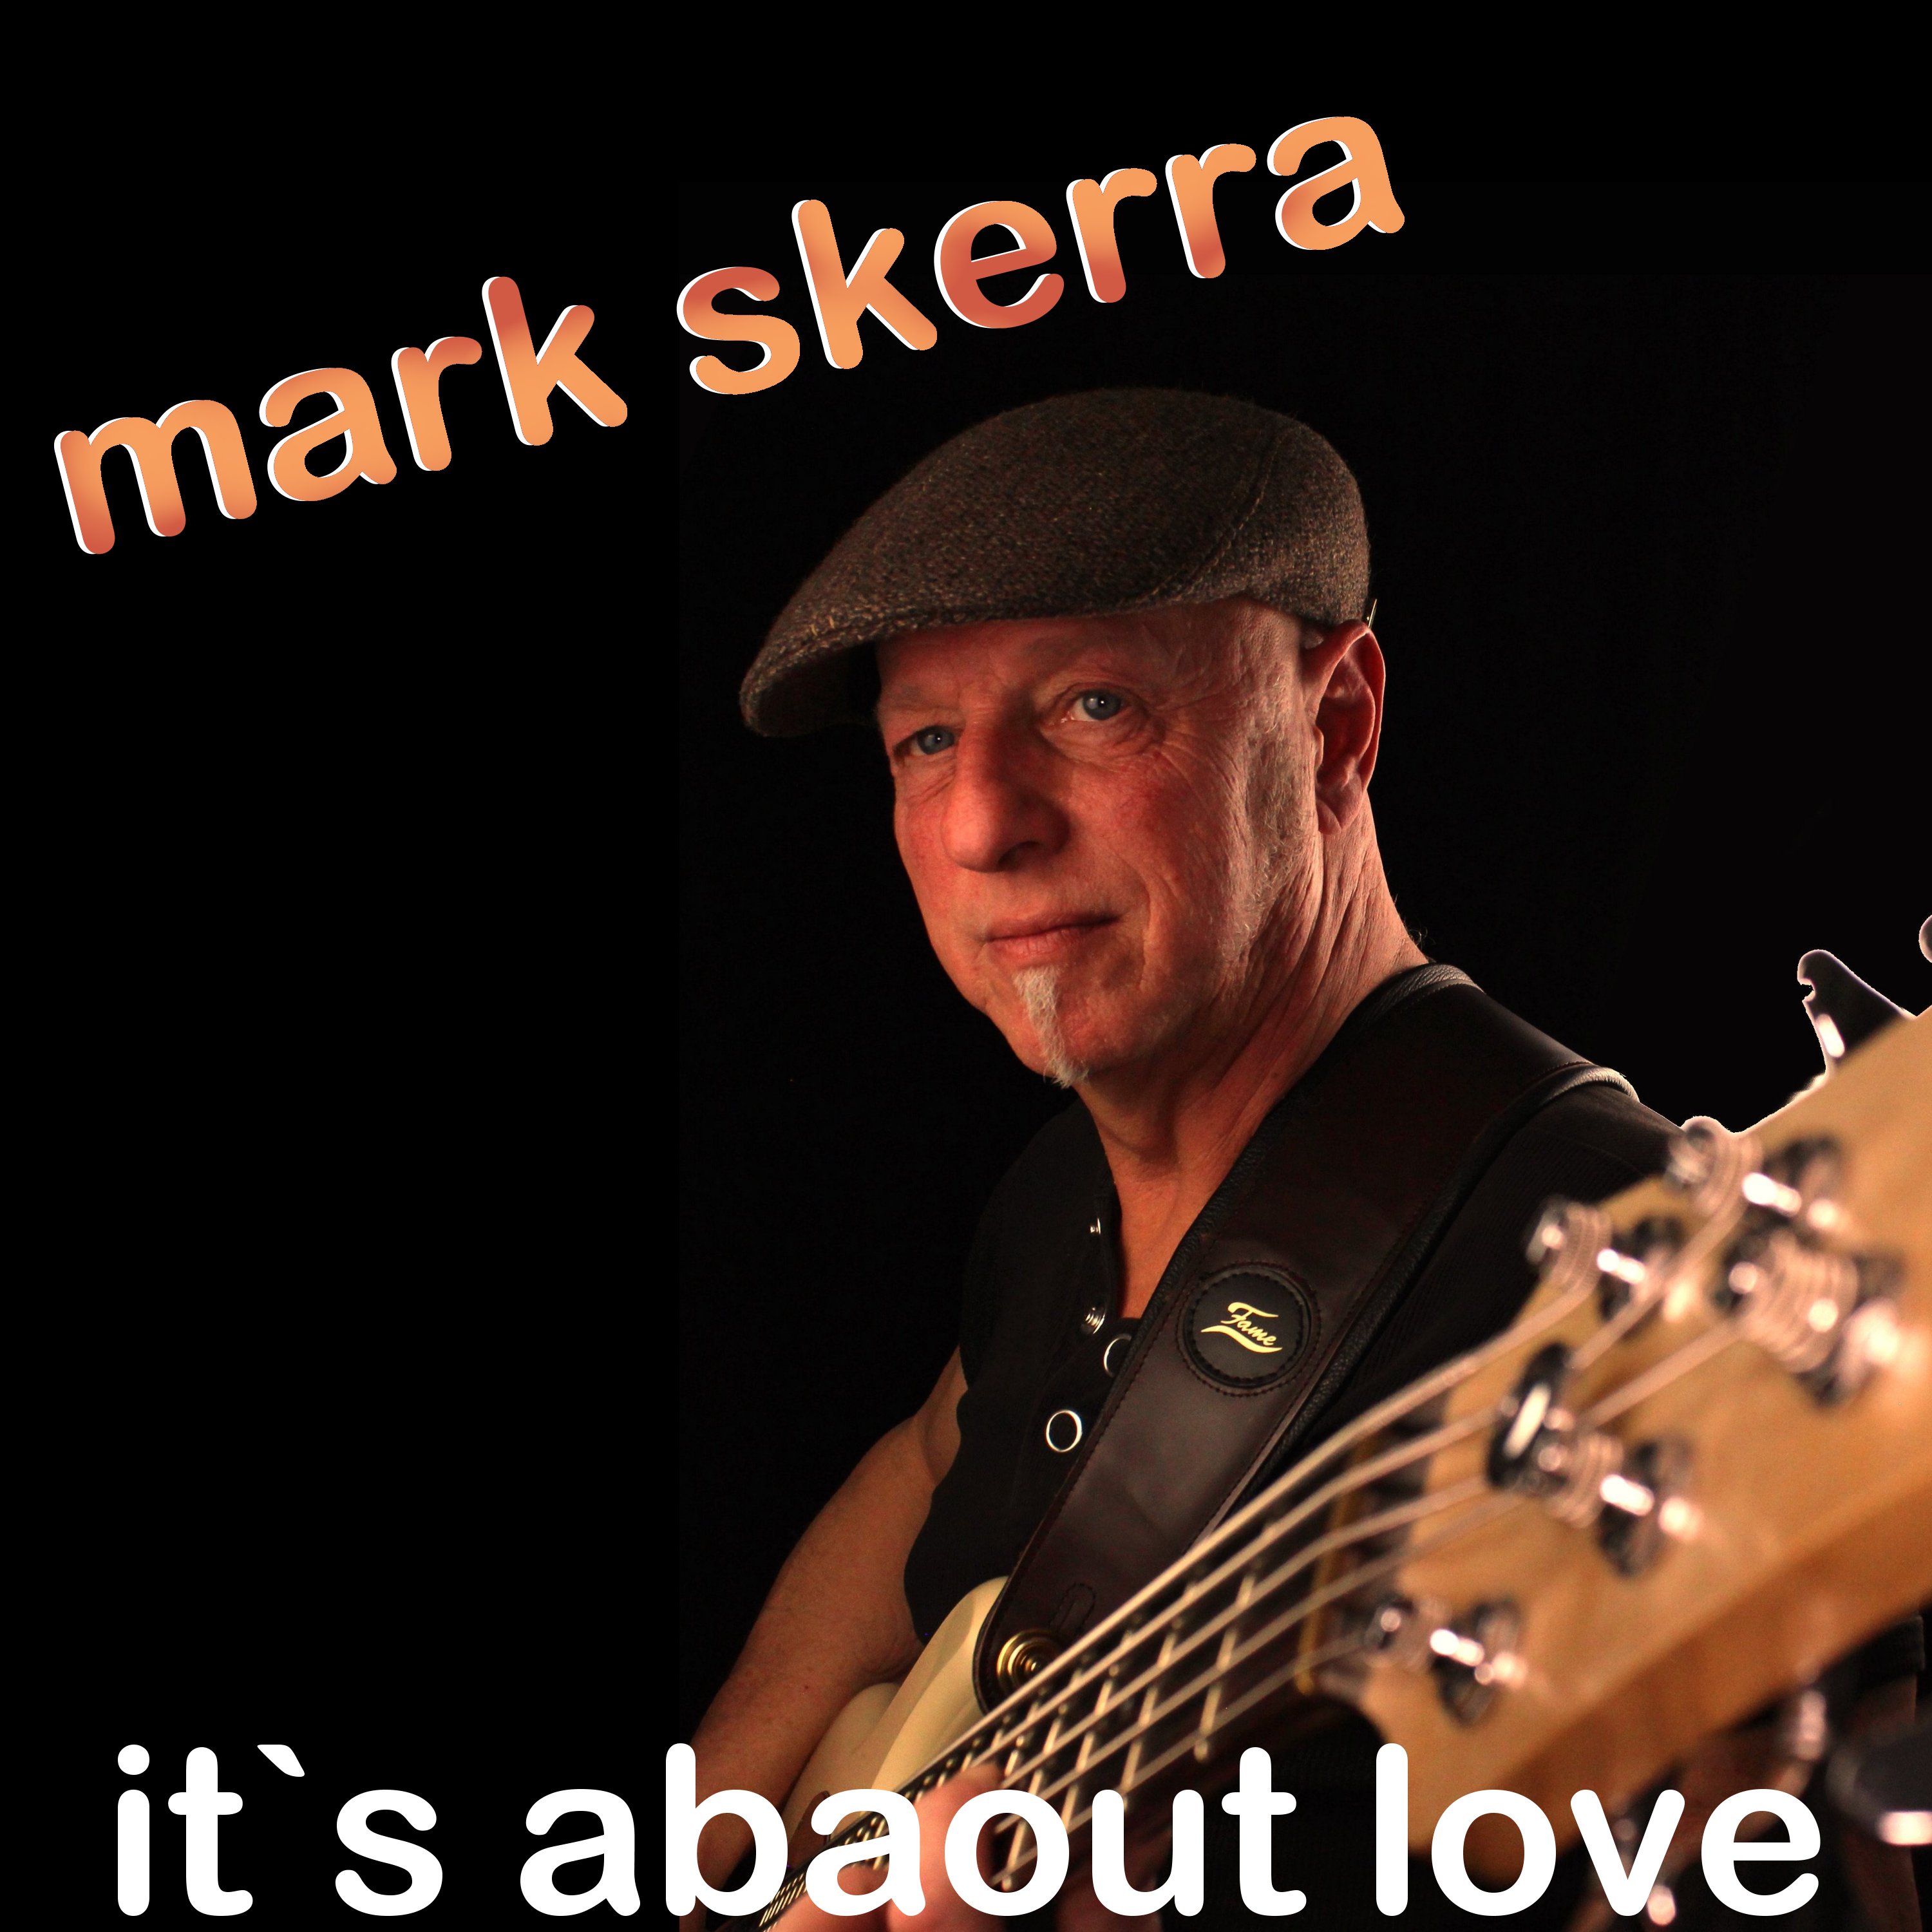 EP  Mark Skerra  -  IT´S ABOUT LOVE